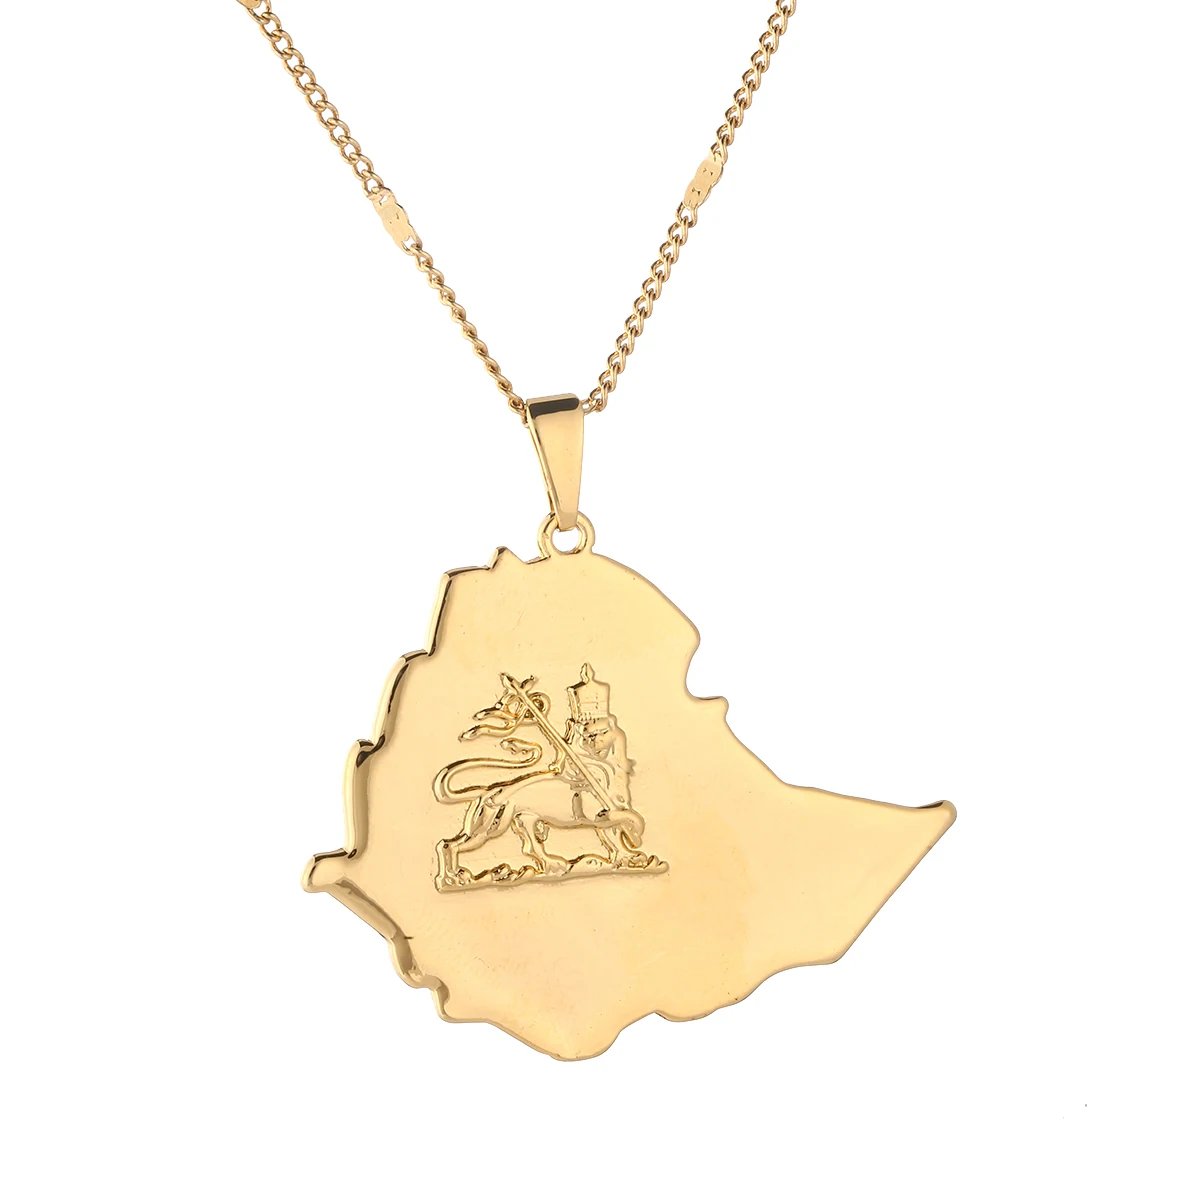 Gold Color Suriname Map Pendant Necklaces Stainless Steel Jewelry Ethnic Gifts 